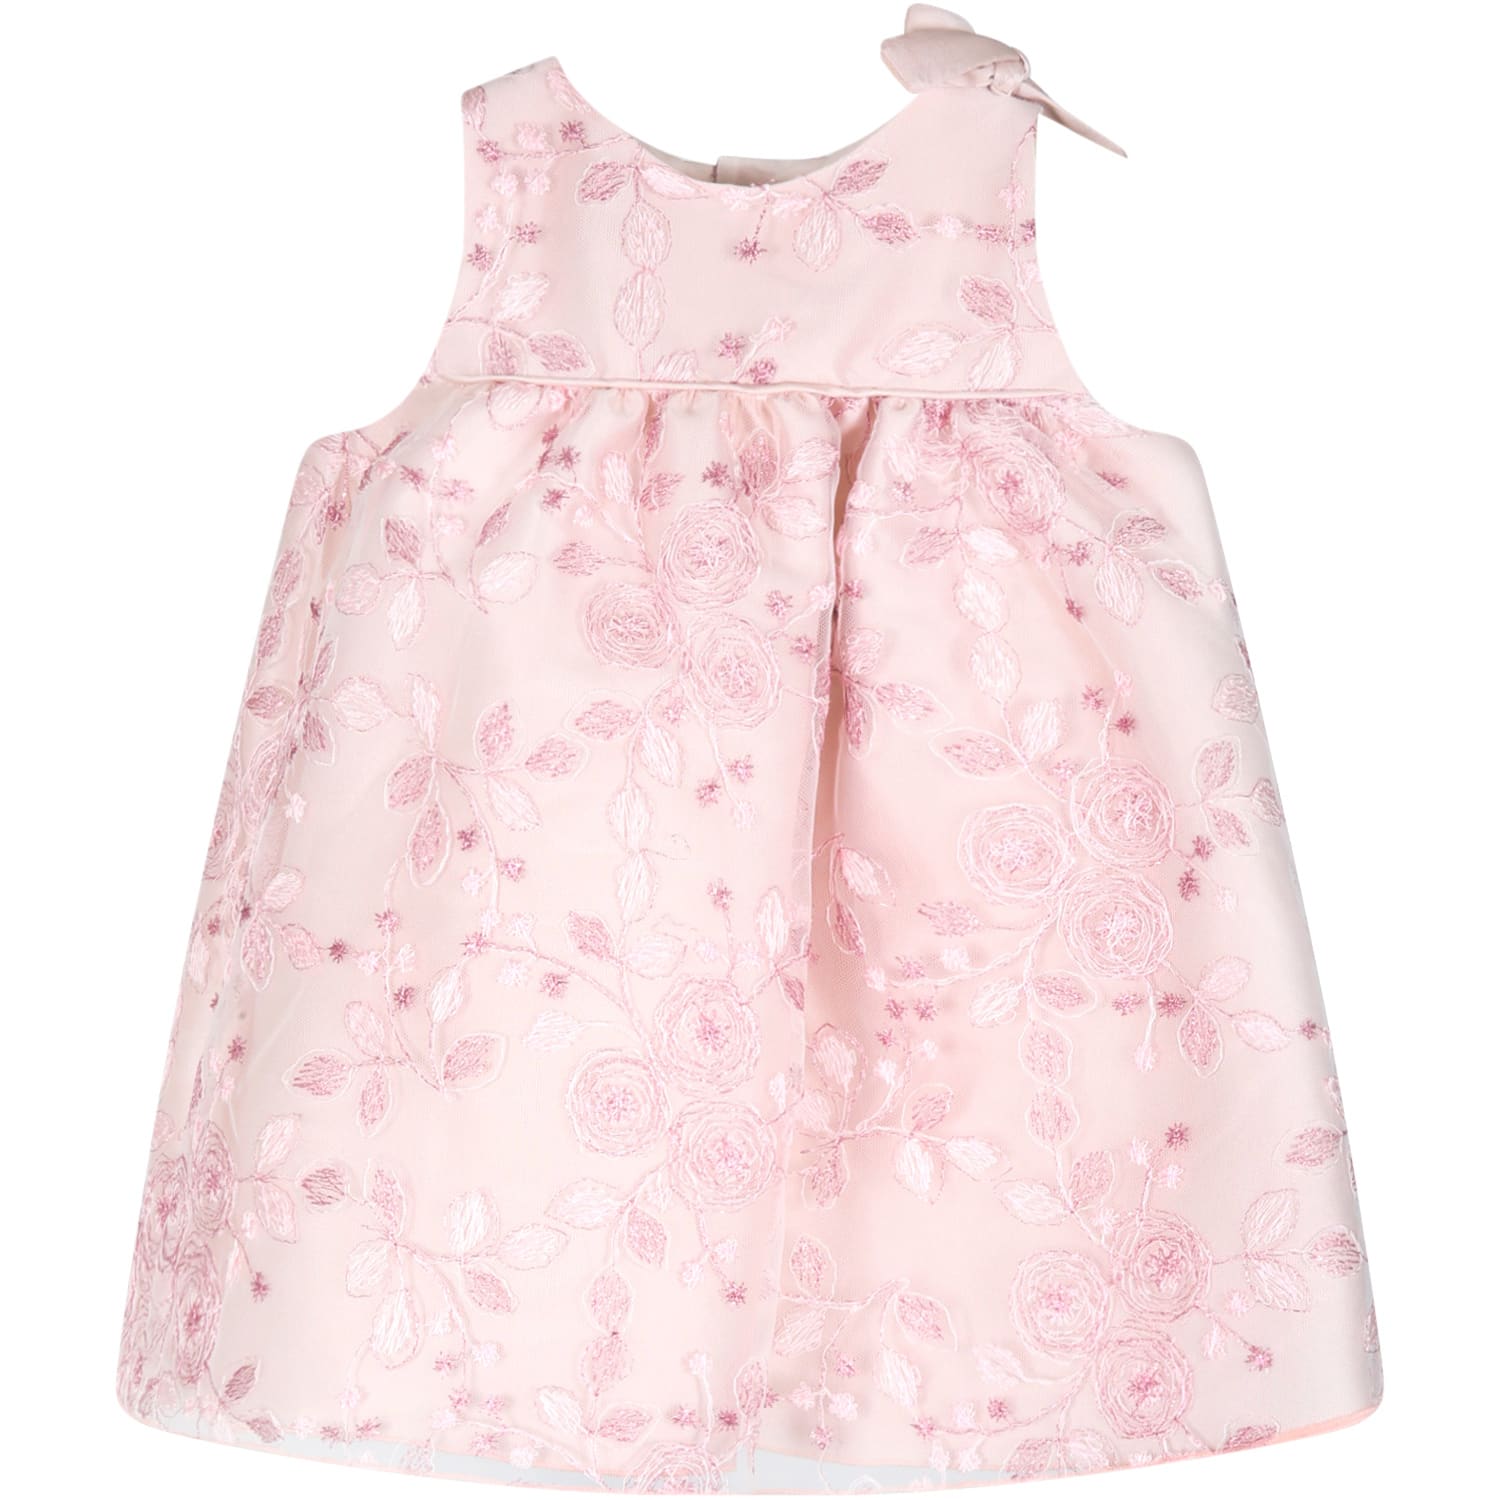 La stupenderia Lilac Dress For Babygirl With Flowers